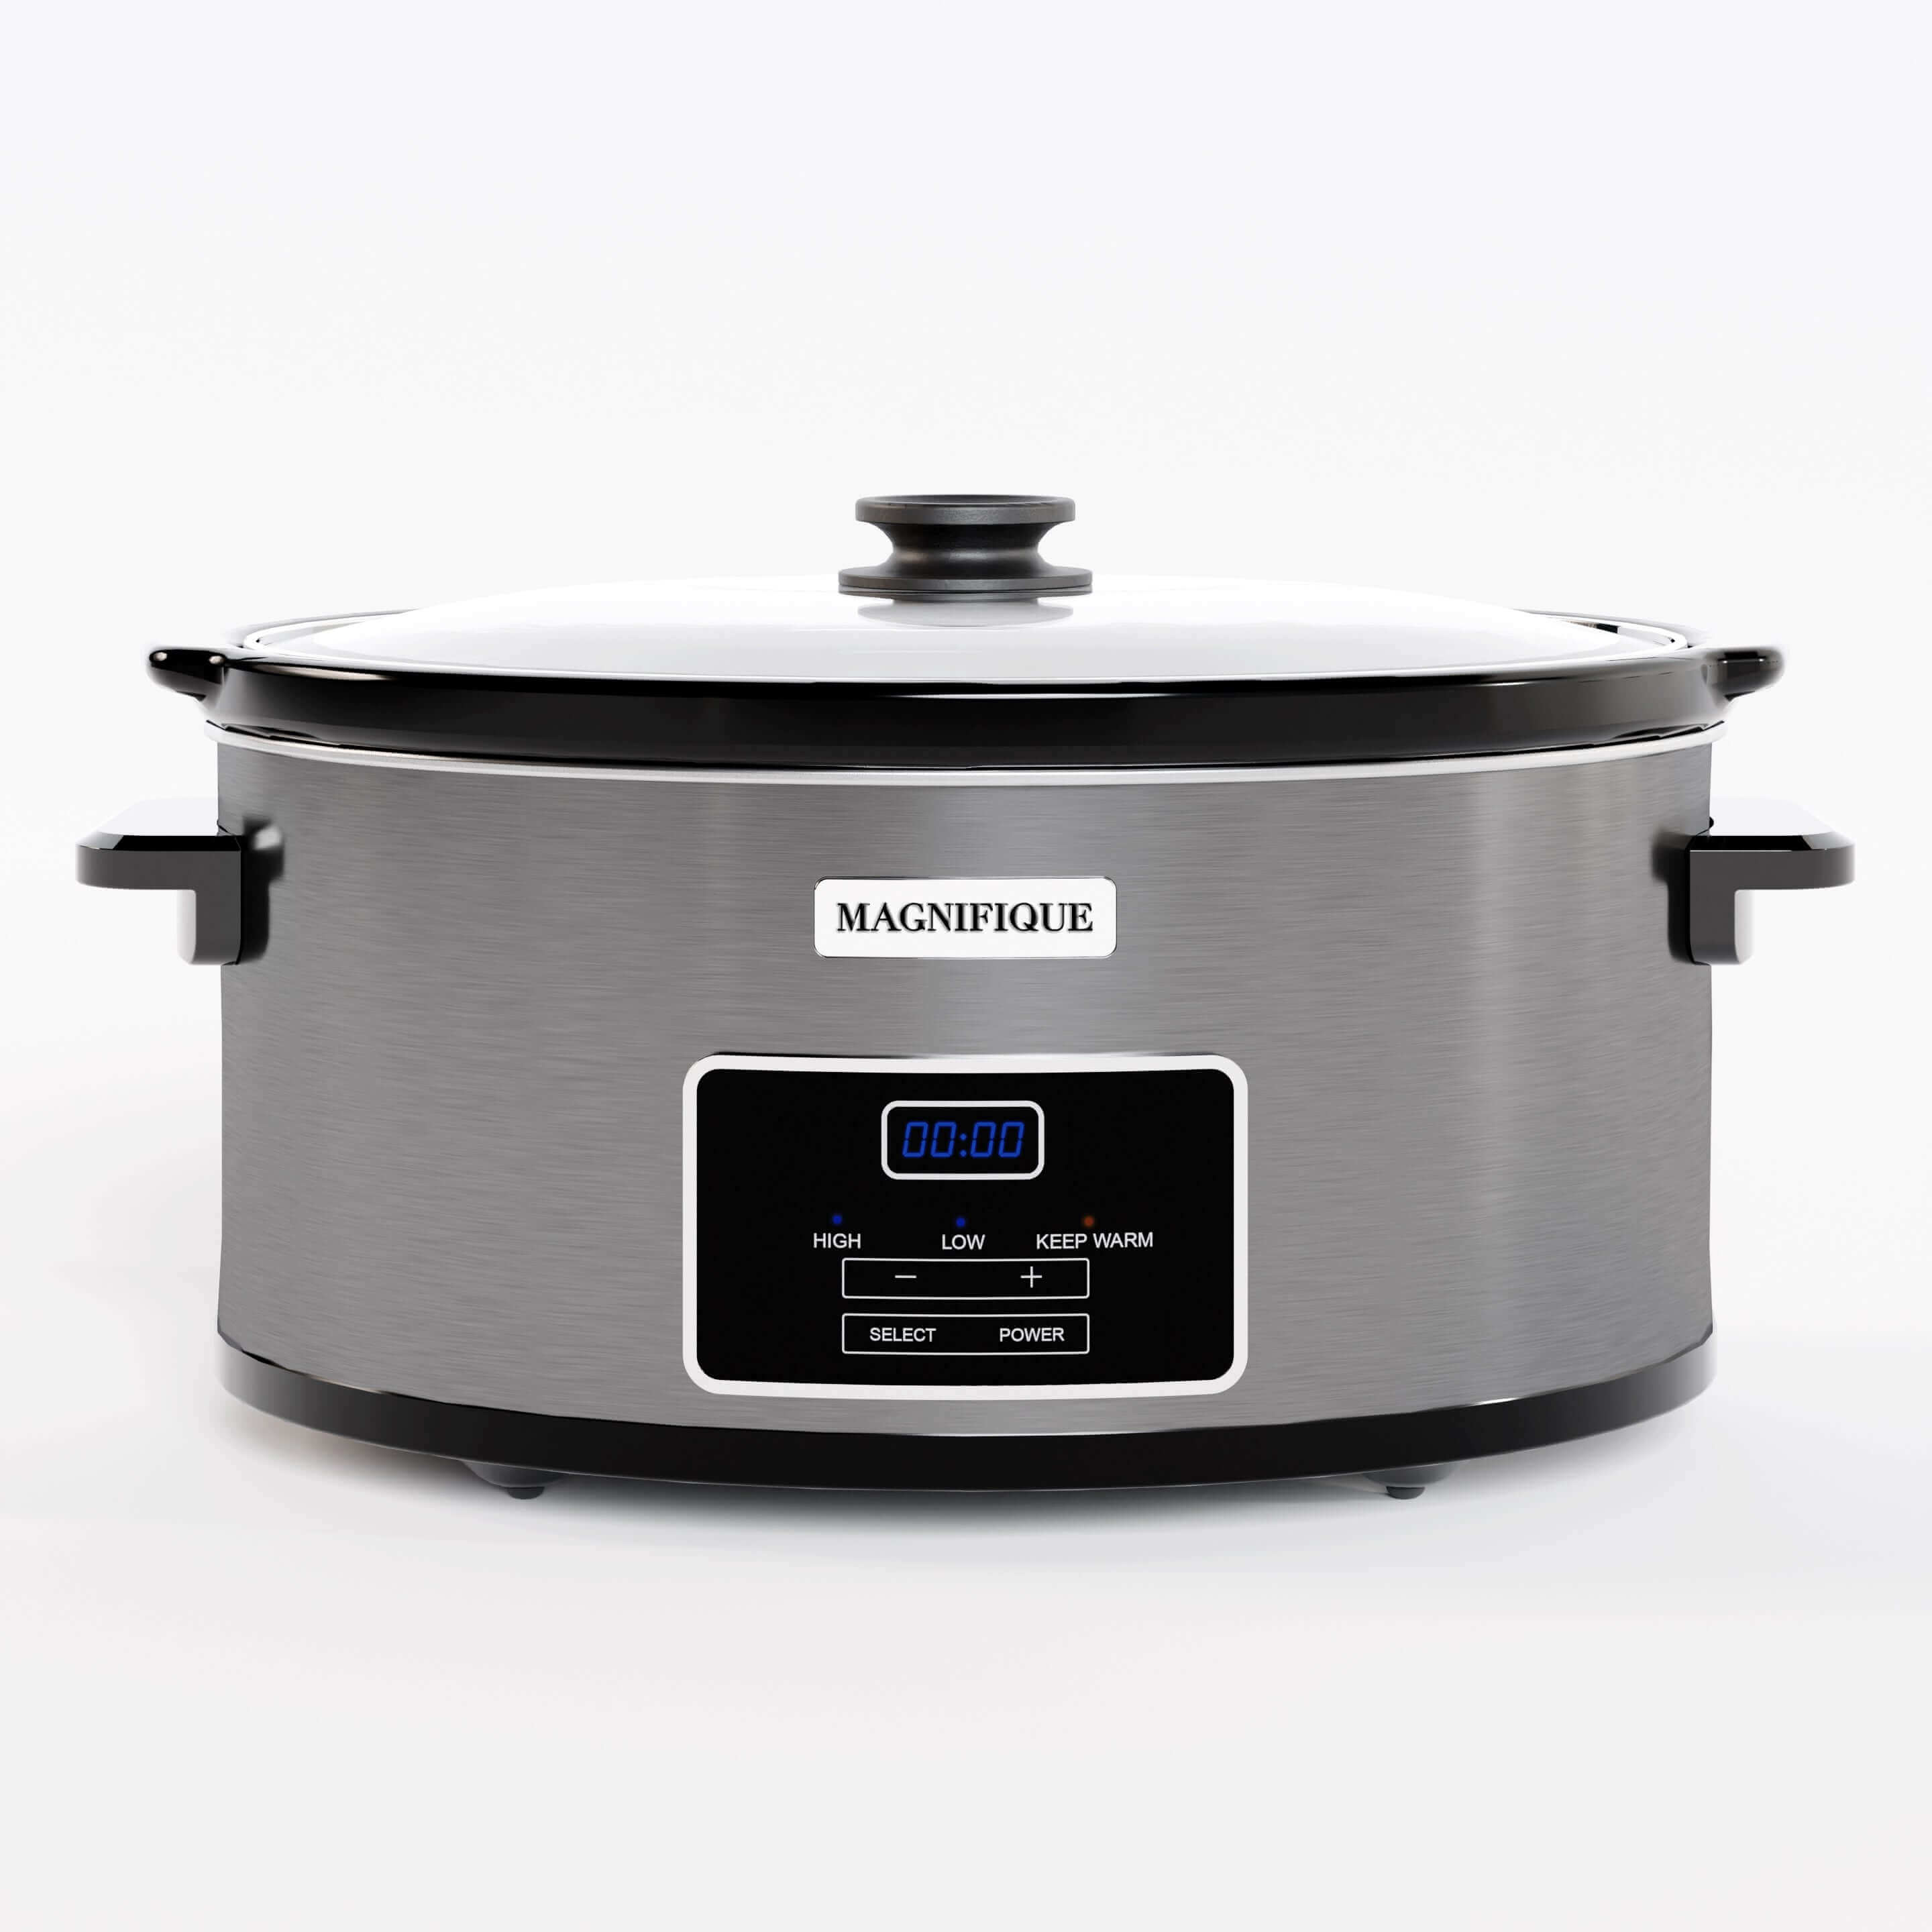 Magnifique 7 Quart Slow Cooker Oval Manual Pot Food Warmer with 3 Cooking  Settings, Stainless Steel